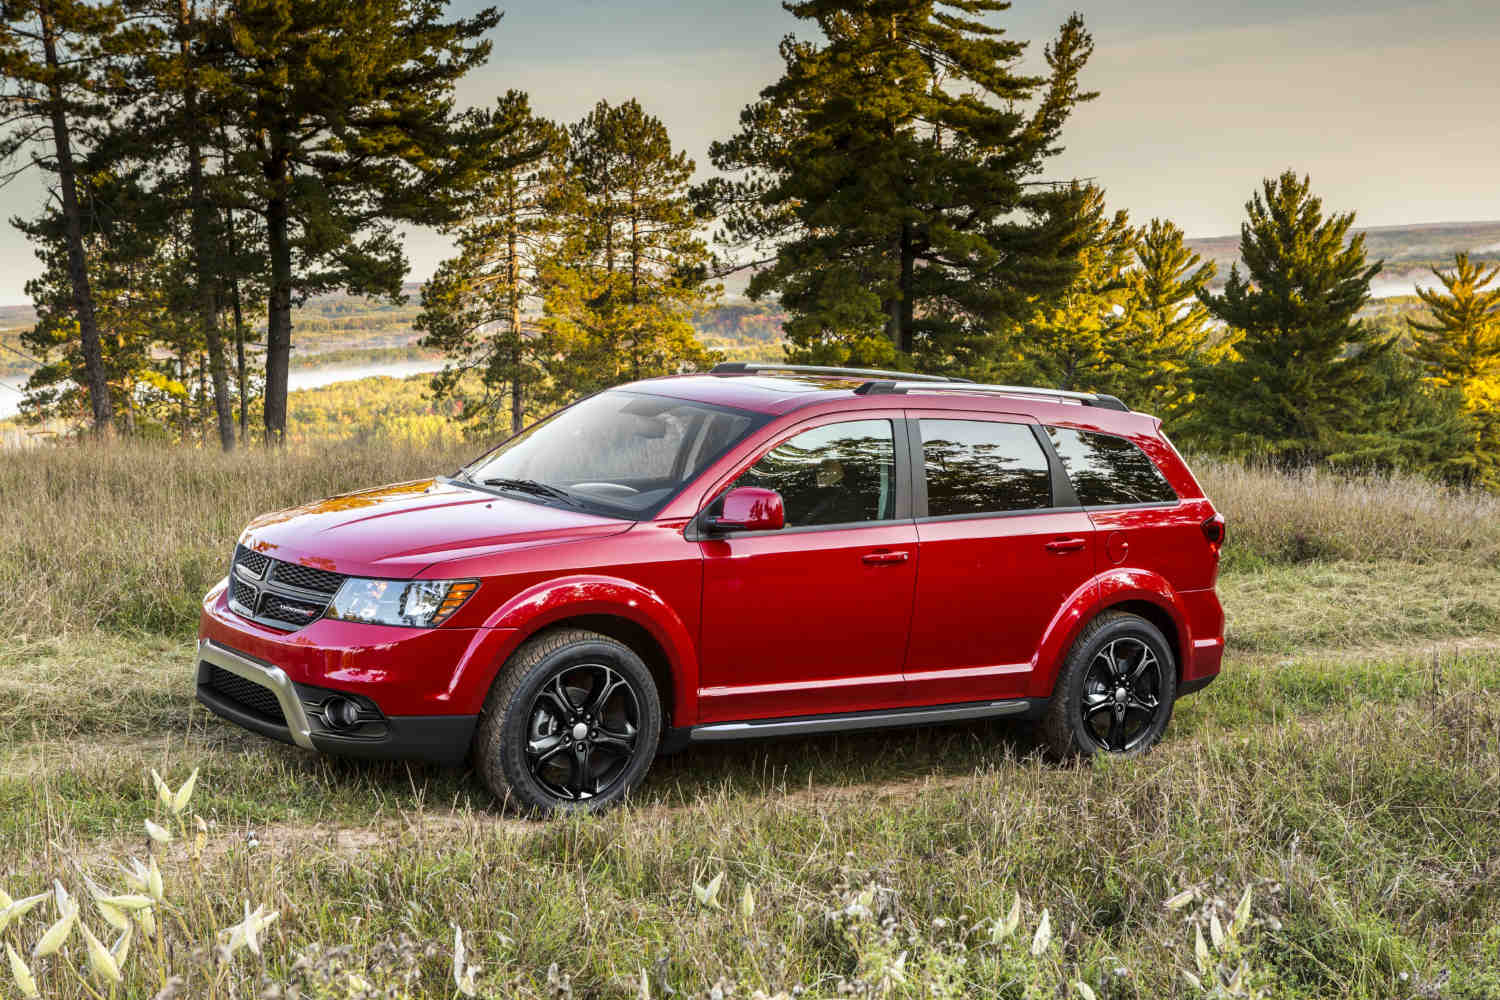 This Dodge Journey is a used SUV you might want to skip